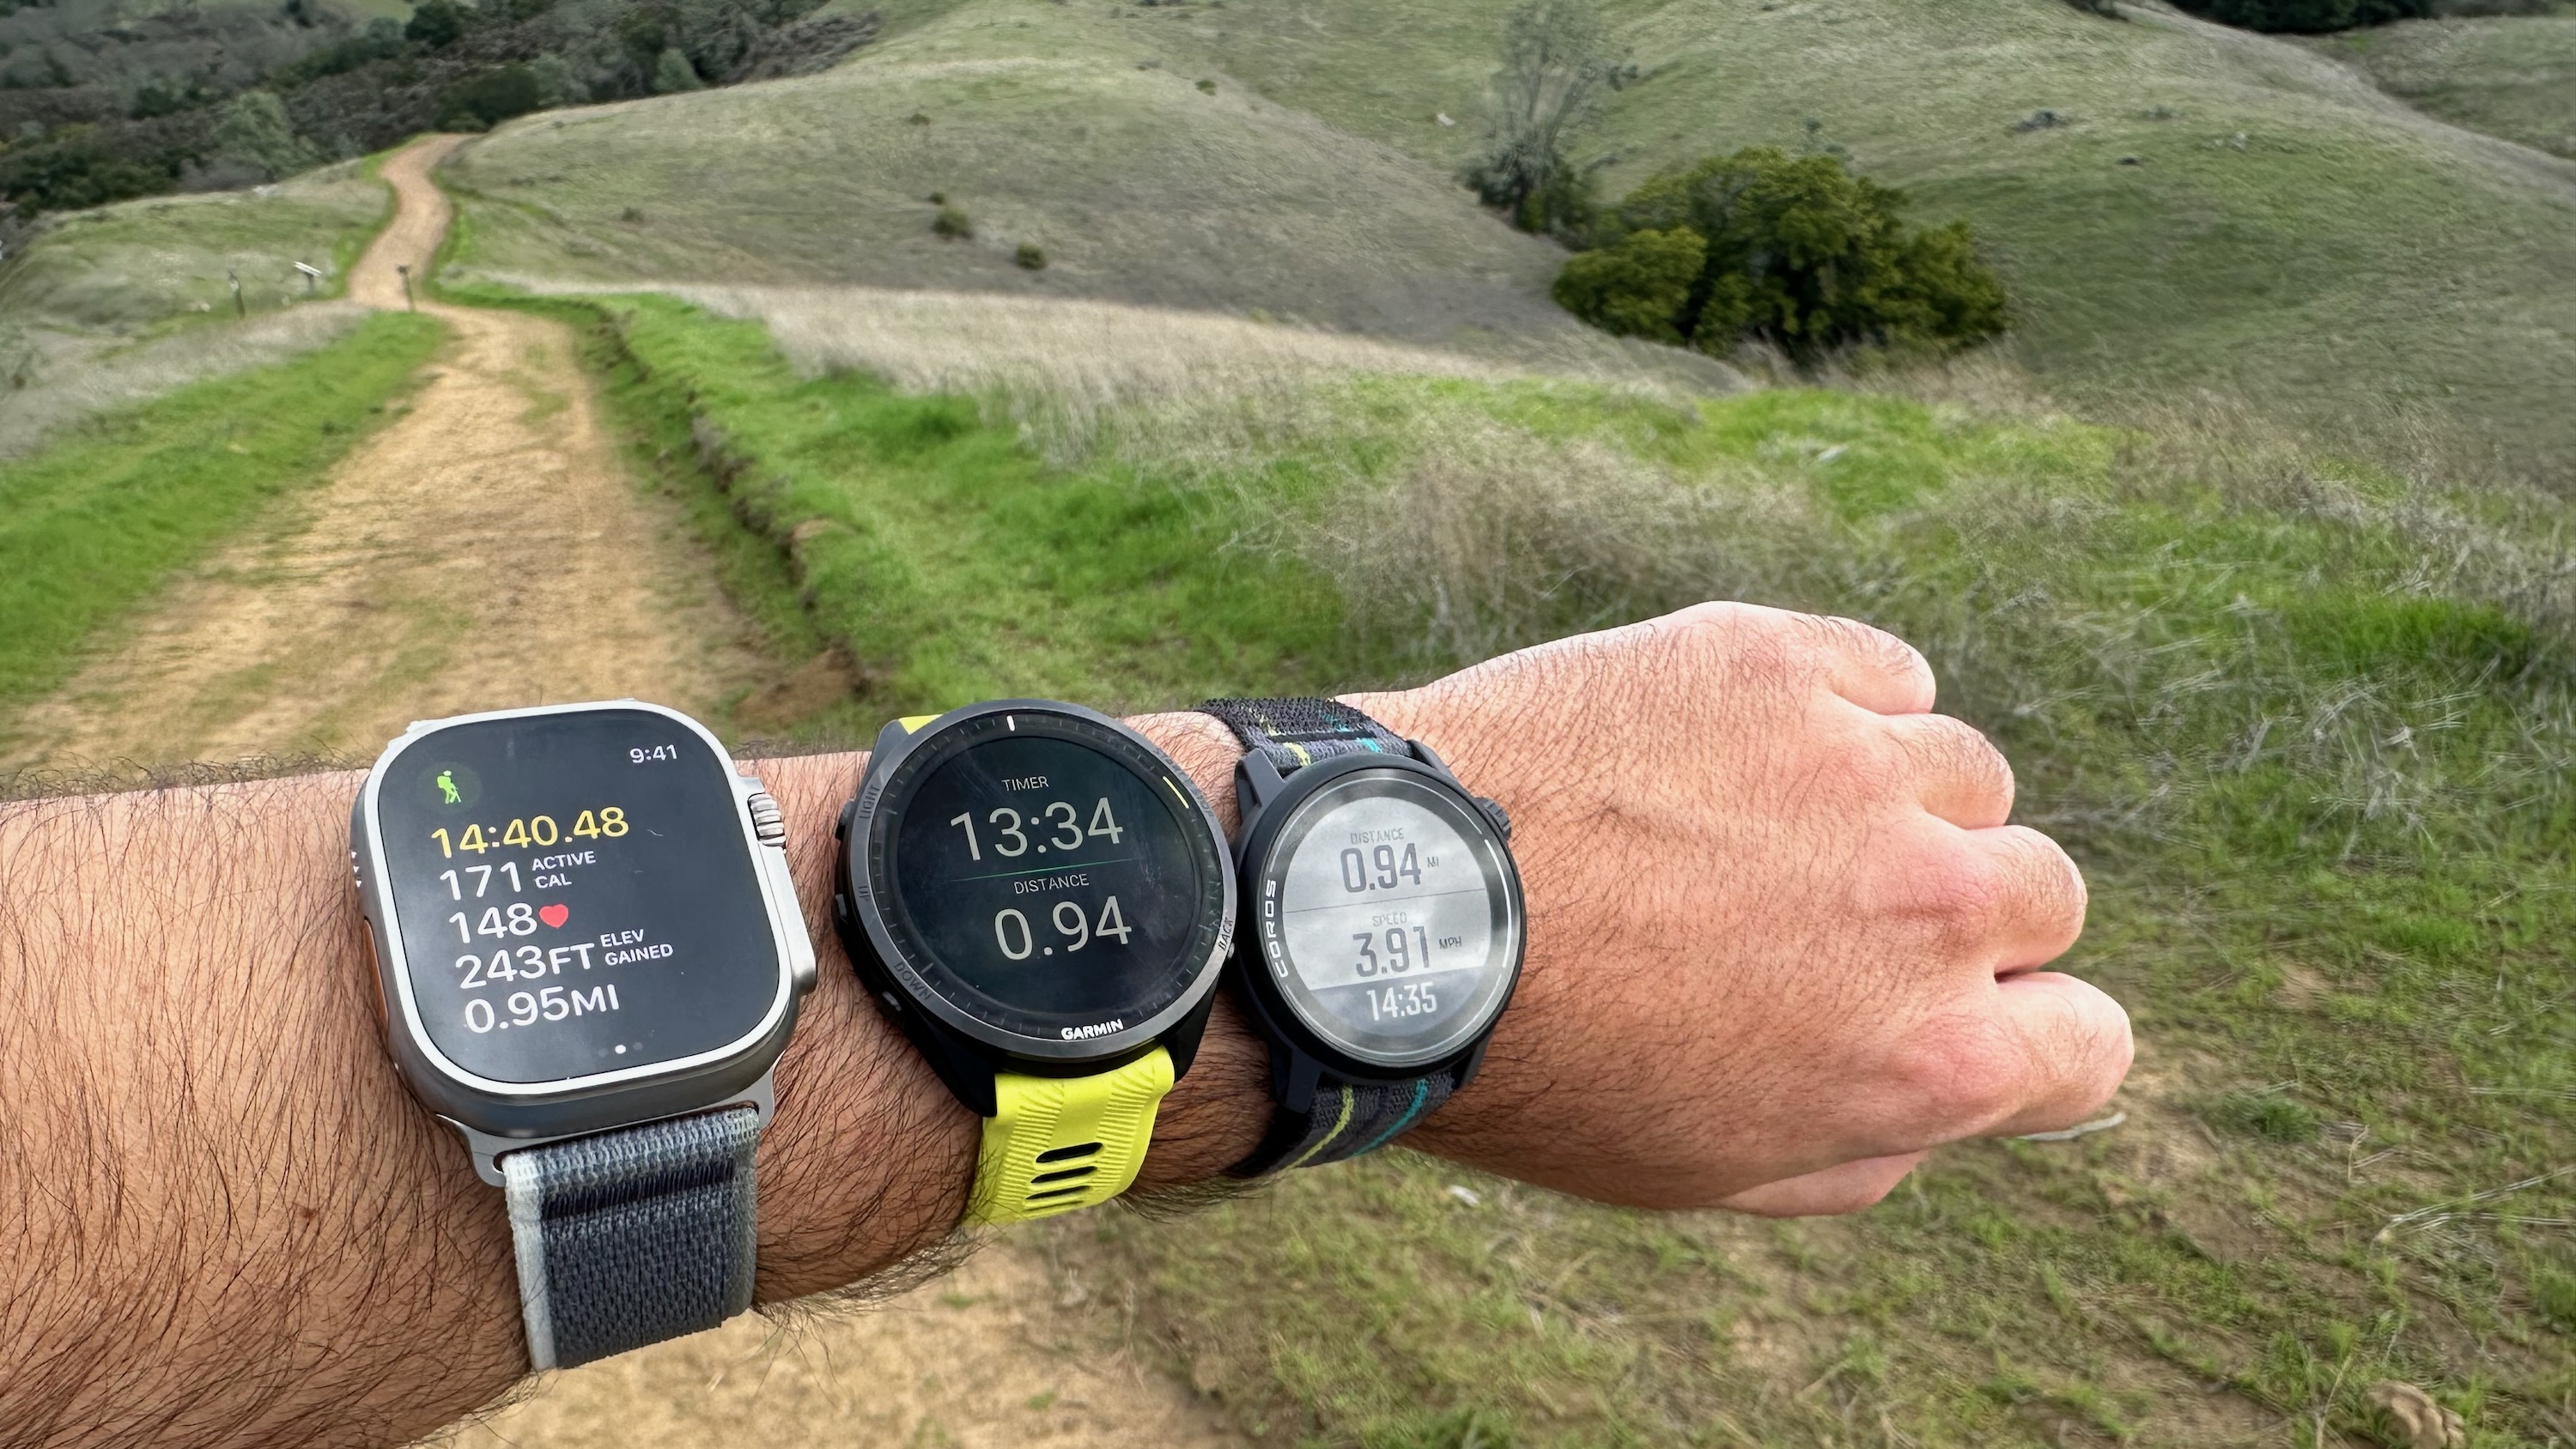 The Apple Watch Ultra 2, Garmin Forerunner 965, and COROS PACE 3 all worn on one wrist at the base of the Mount Diablo Summit Trail.